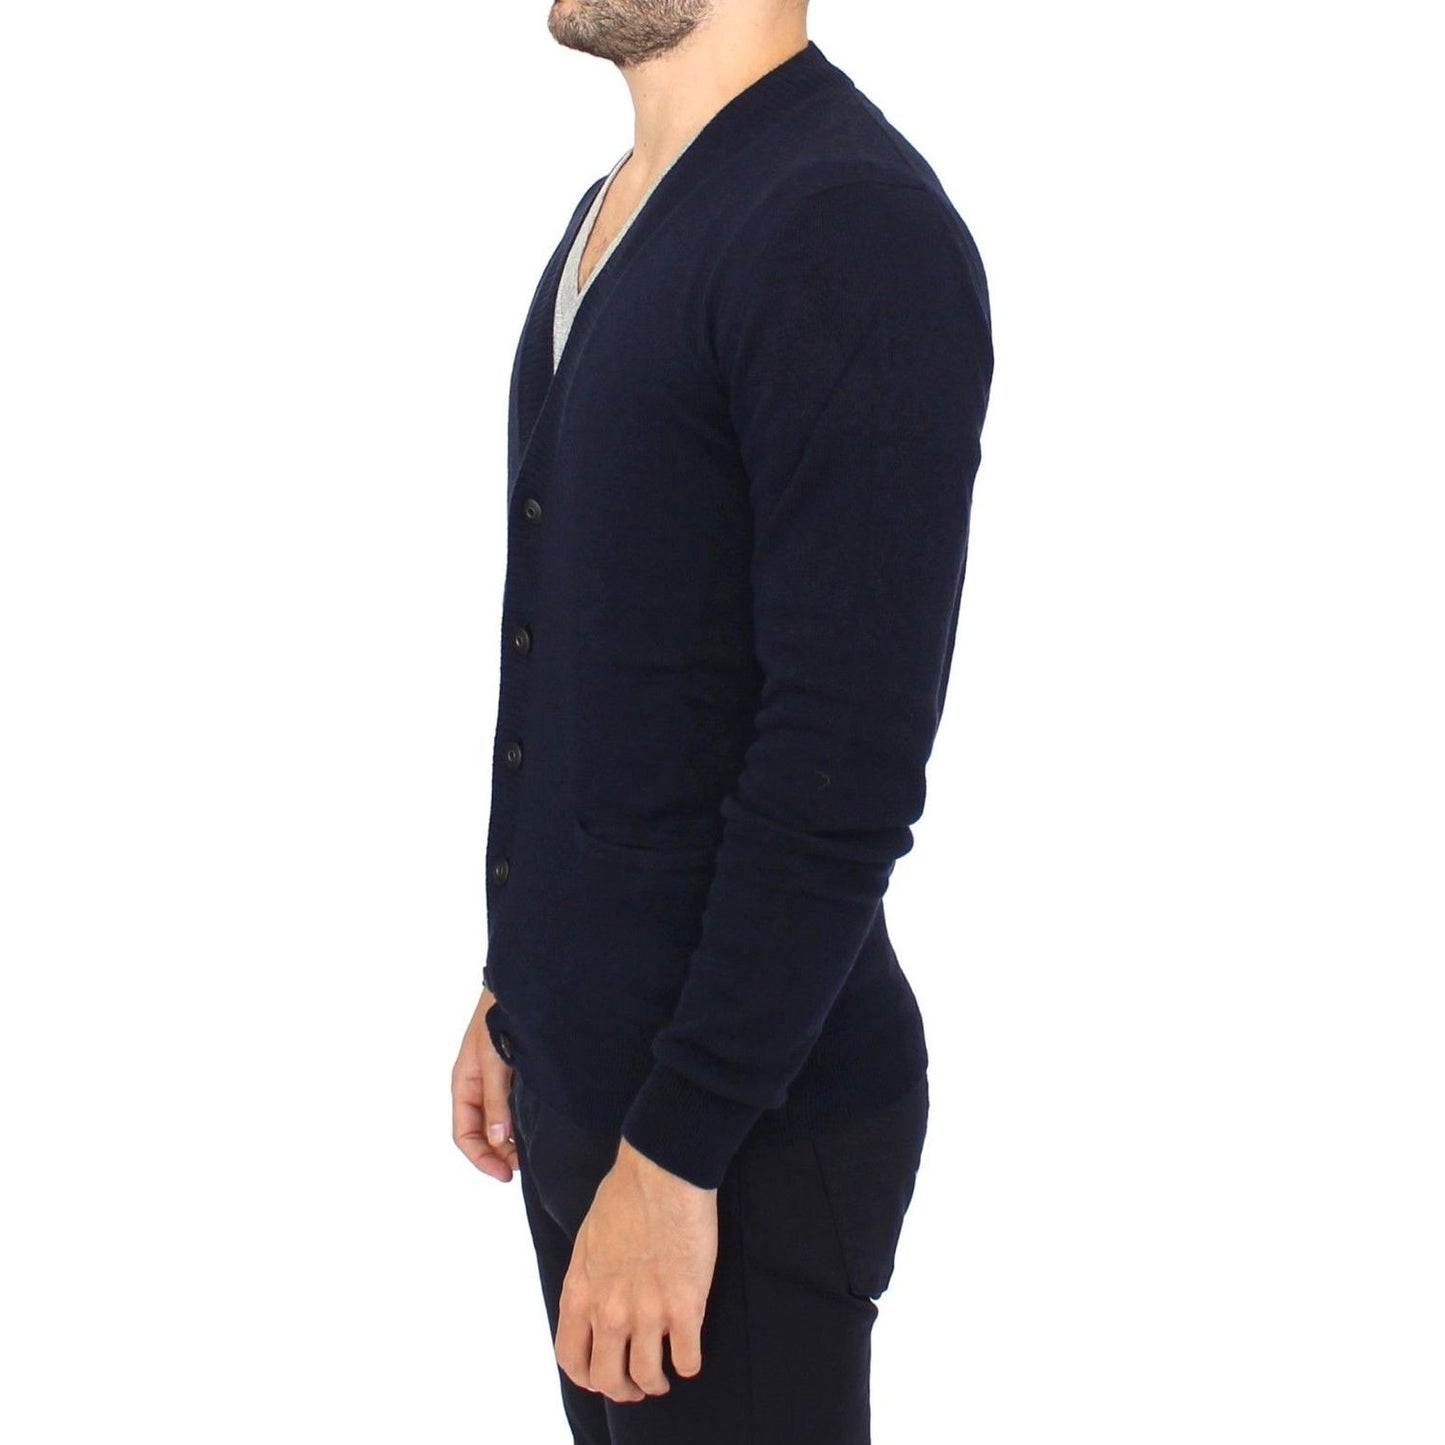 Ermanno Scervino Chic Blue Wool Blend Cardigan Sweater blue-wool-cashmere-cardigan-pullover-sweater